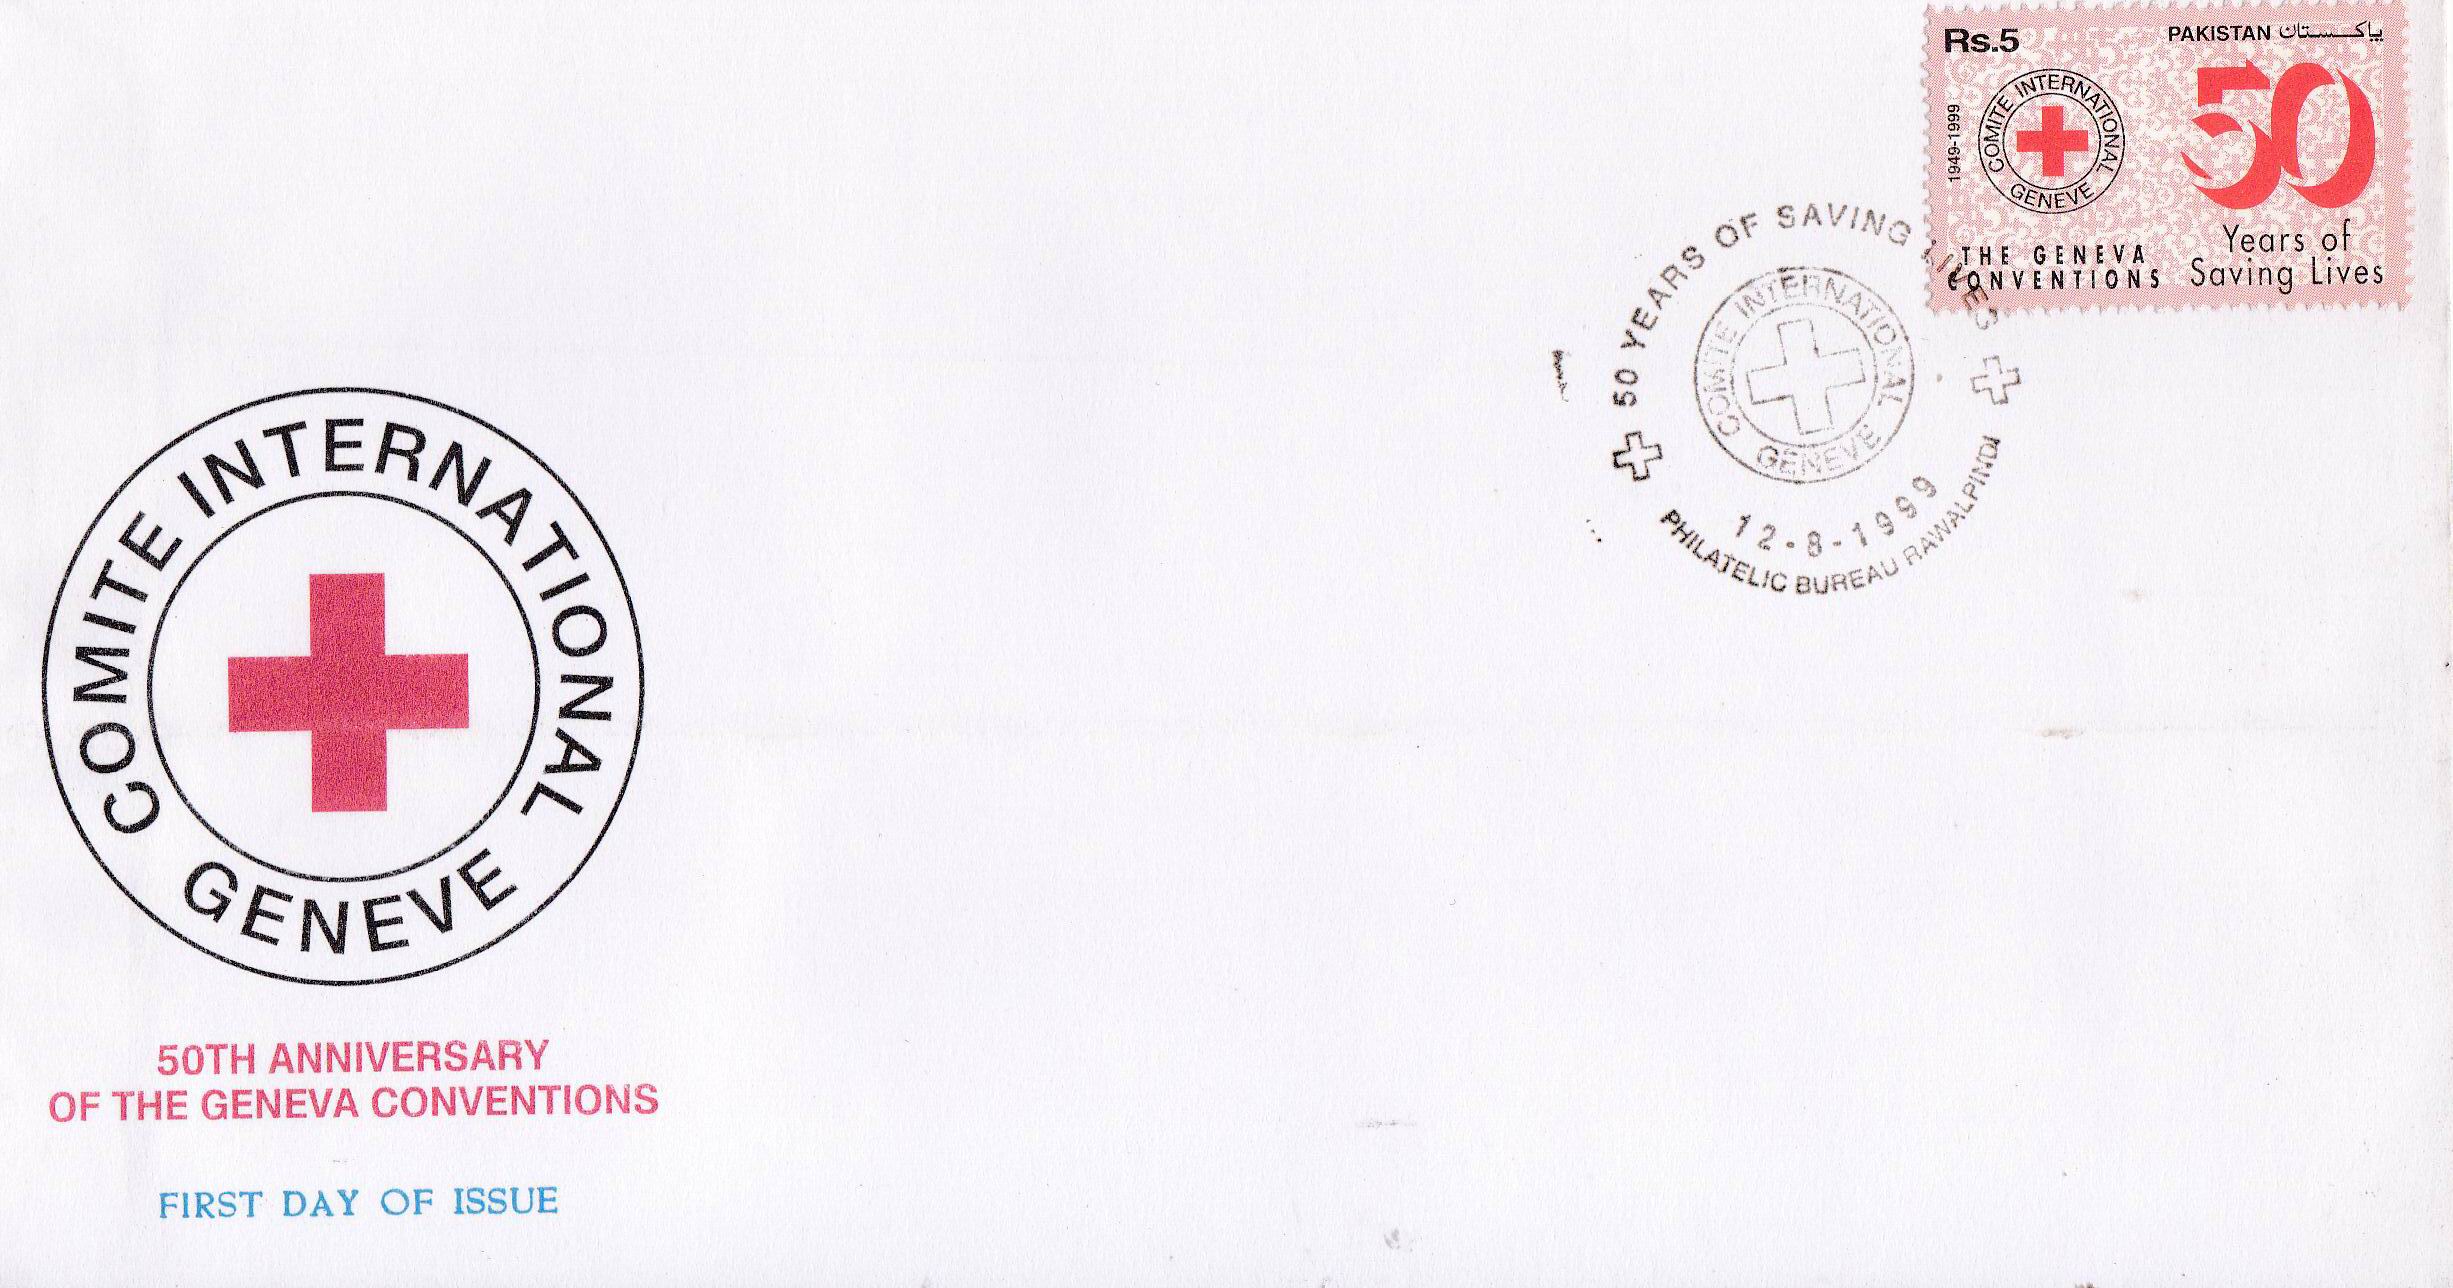 Pakistan Fdc 1999 Brochure & Stamps Geneva Conventions Red Cross - Click Image to Close